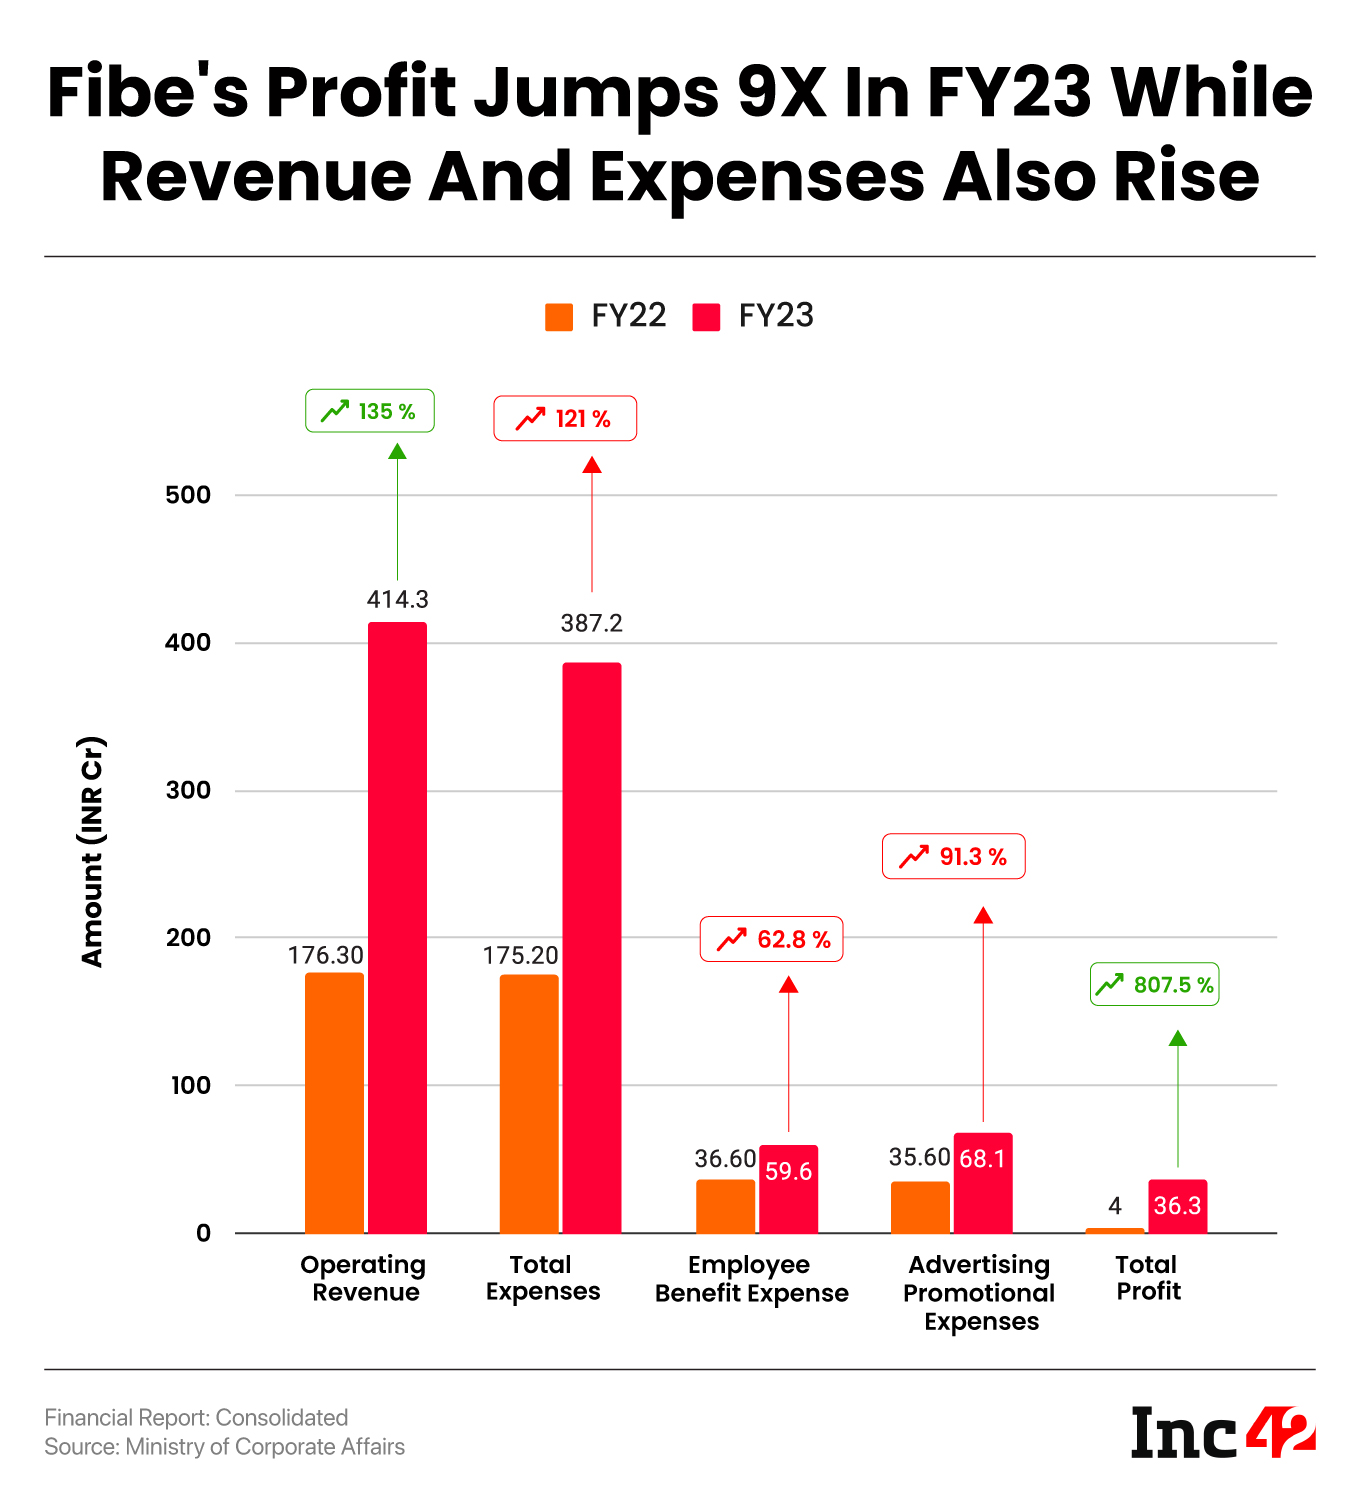 Fibe's Profit Jumps 9X In FY23 While Revenue And Expenses Also Rise